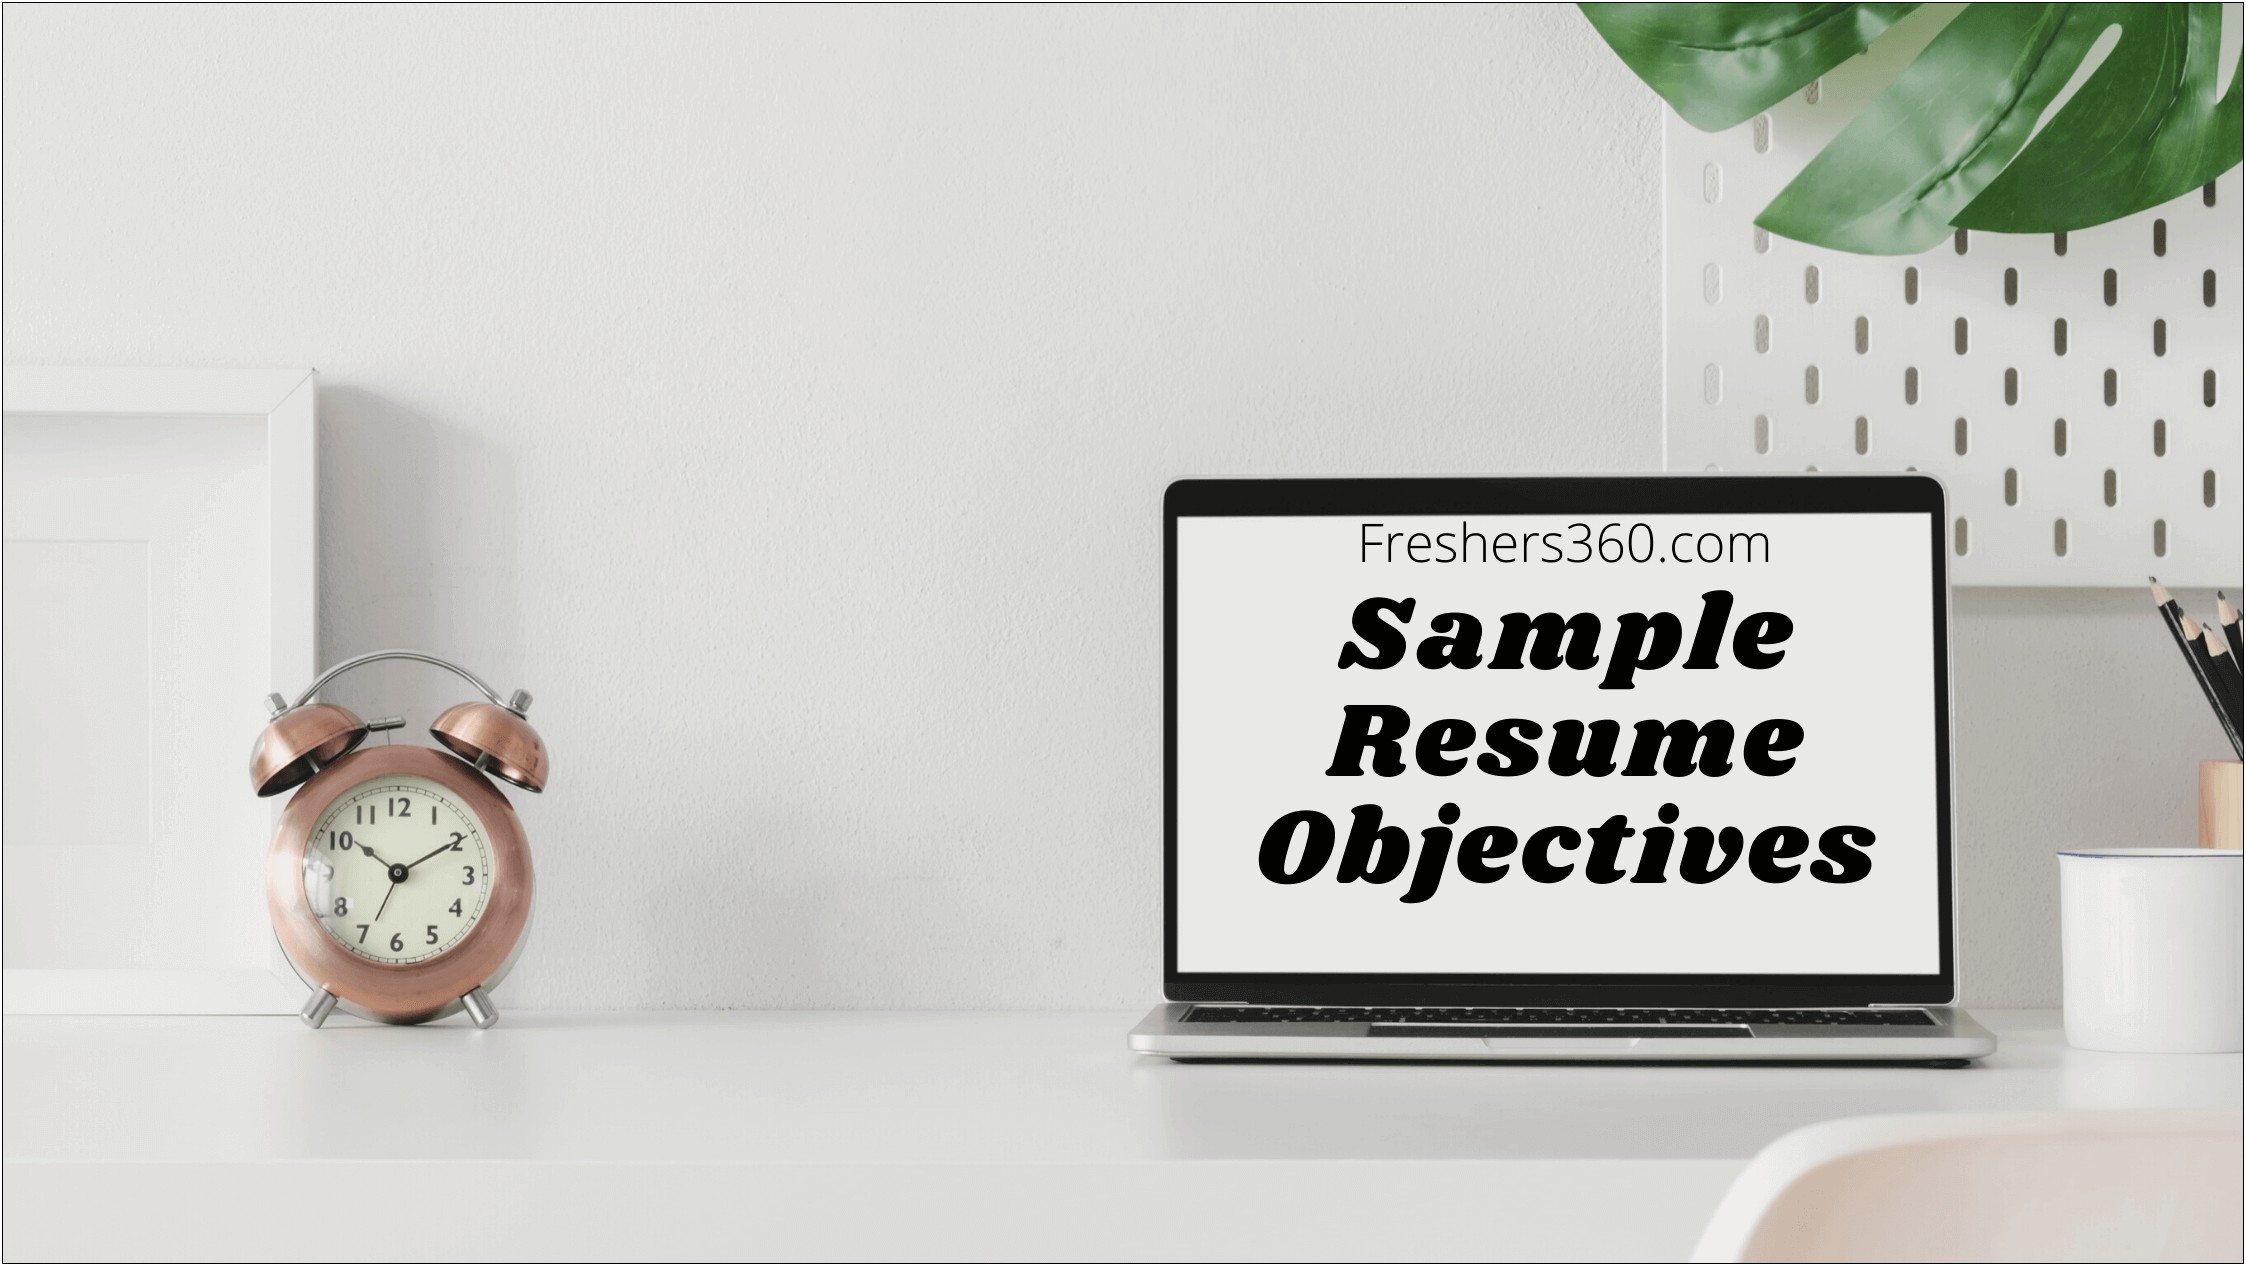 Sample Of Resume Objectives For Sales Position